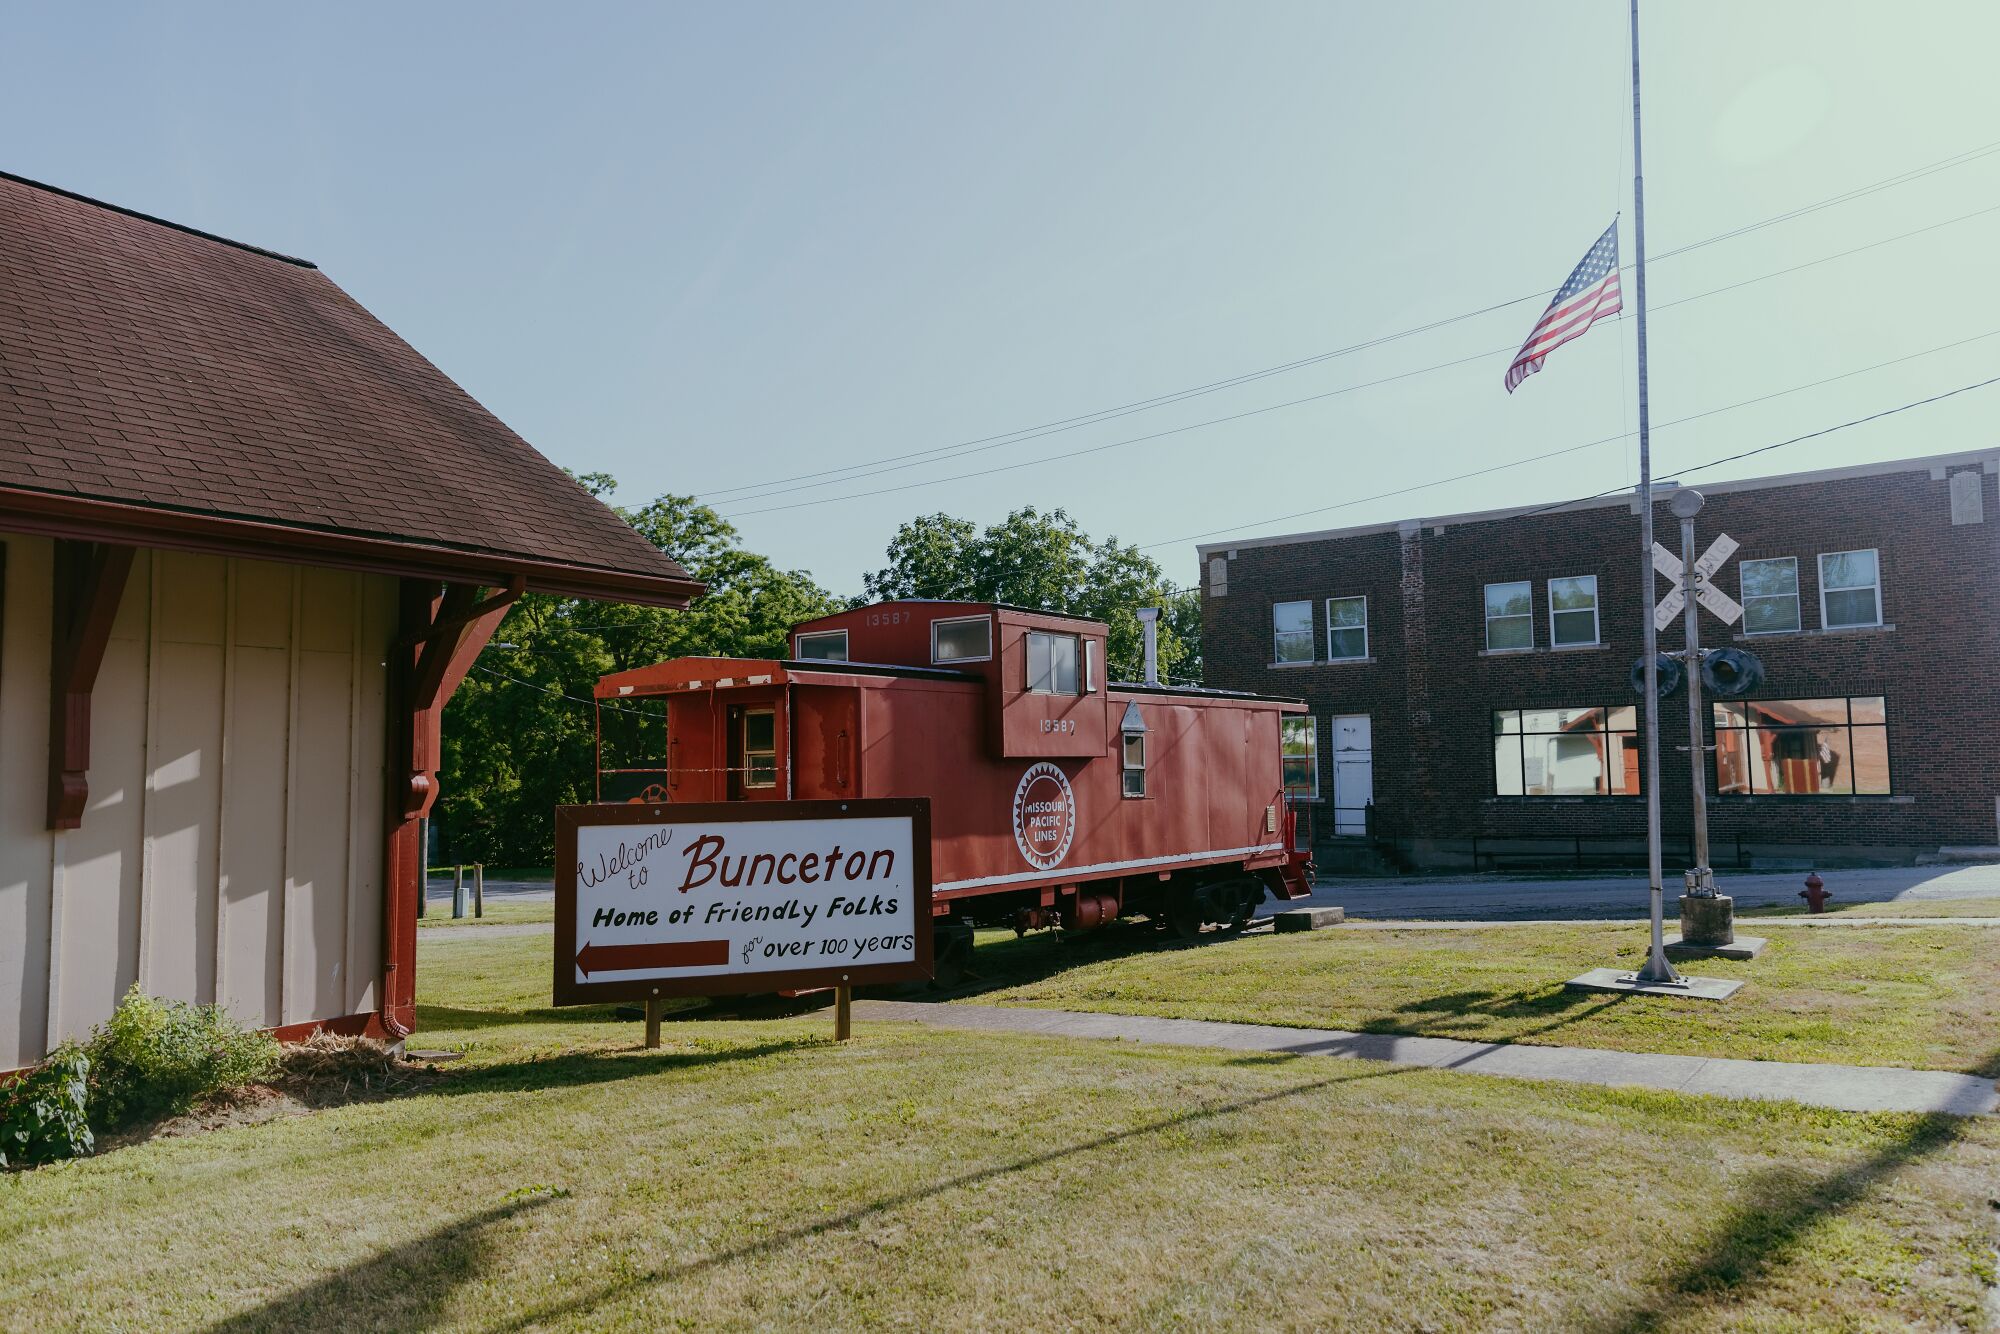 A train car museum that Gene Ulrich helped establish for Bunceton, Mo., during his time as mayor.